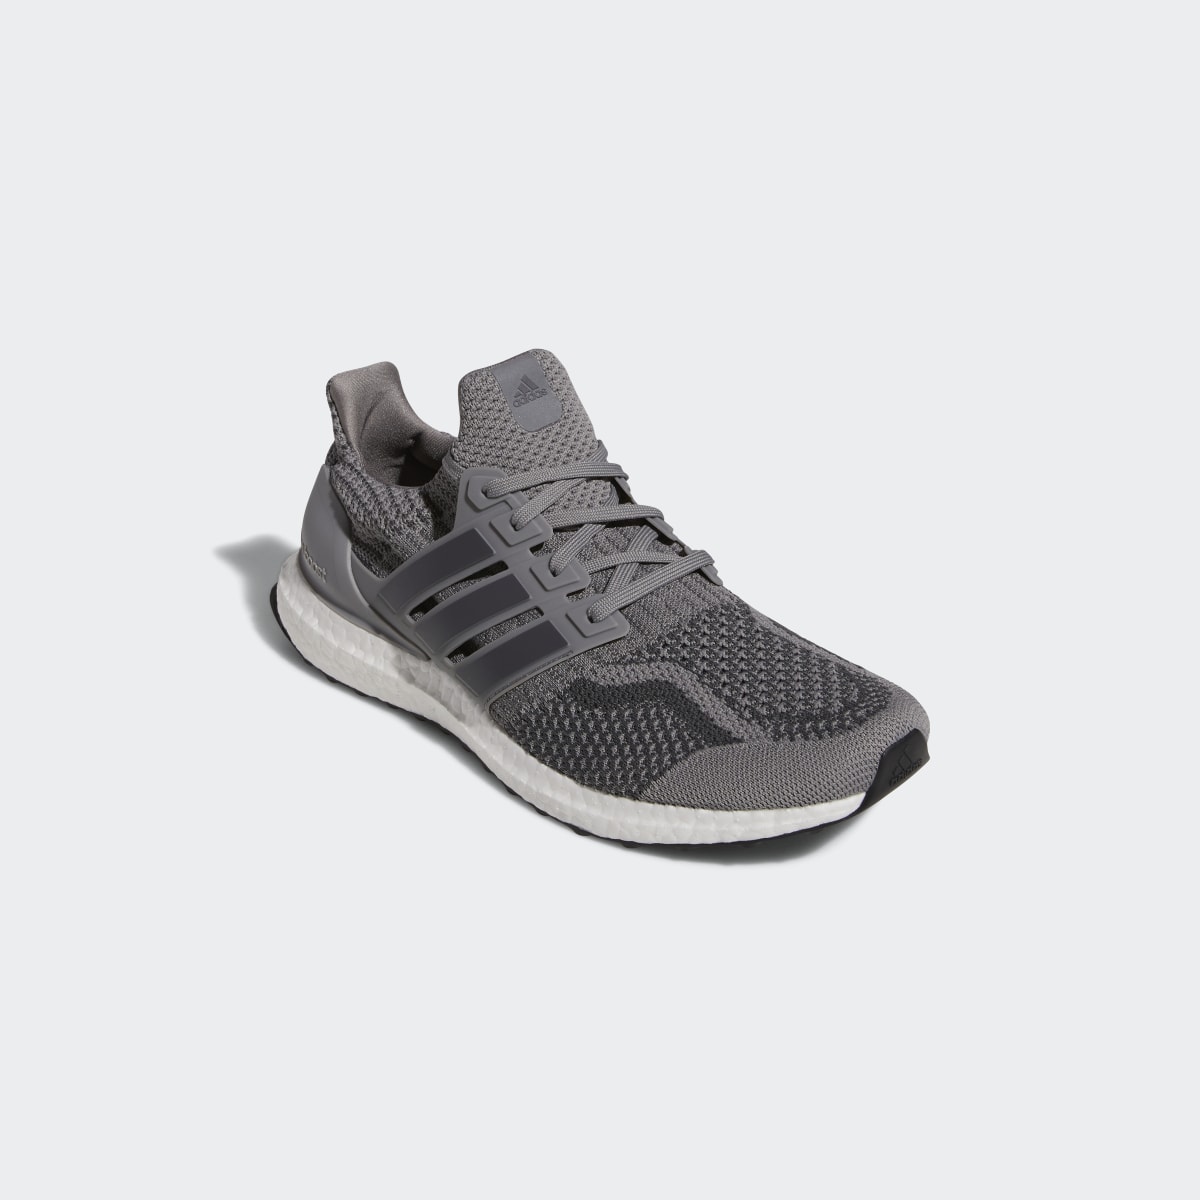 Adidas Ultraboost 5 DNA Running Lifestyle Shoes. 5